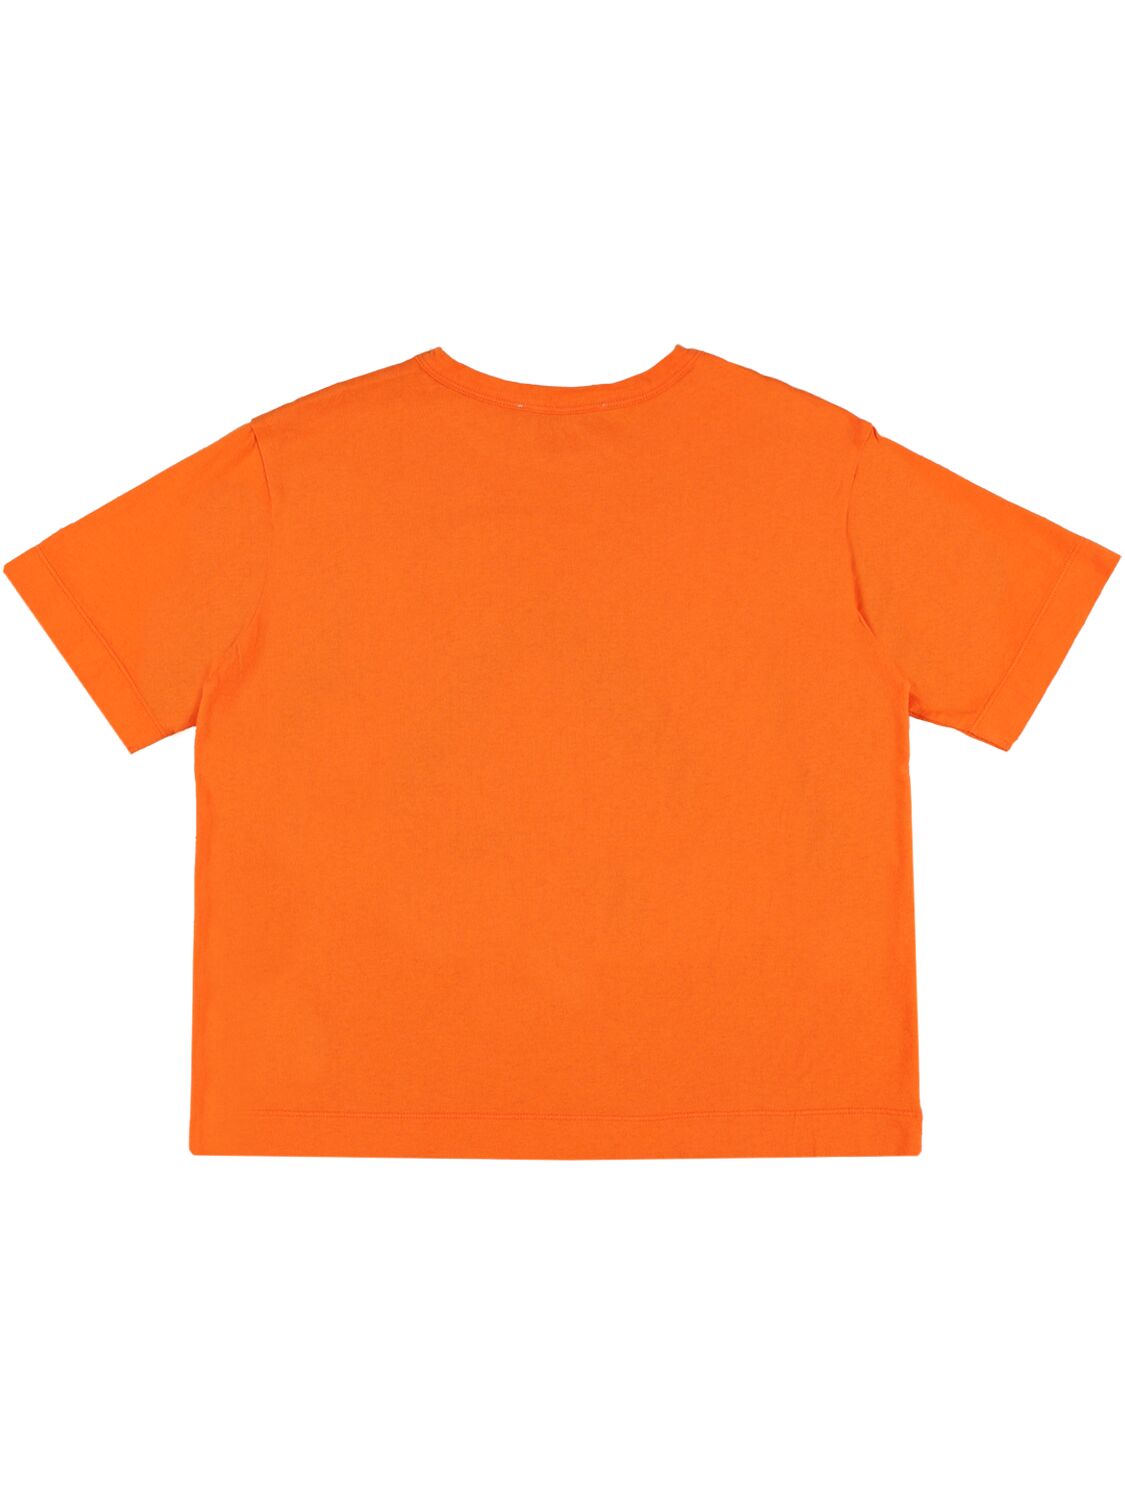 Shop The Animals Observatory Printed Organic Cotton T-shirt In Orange